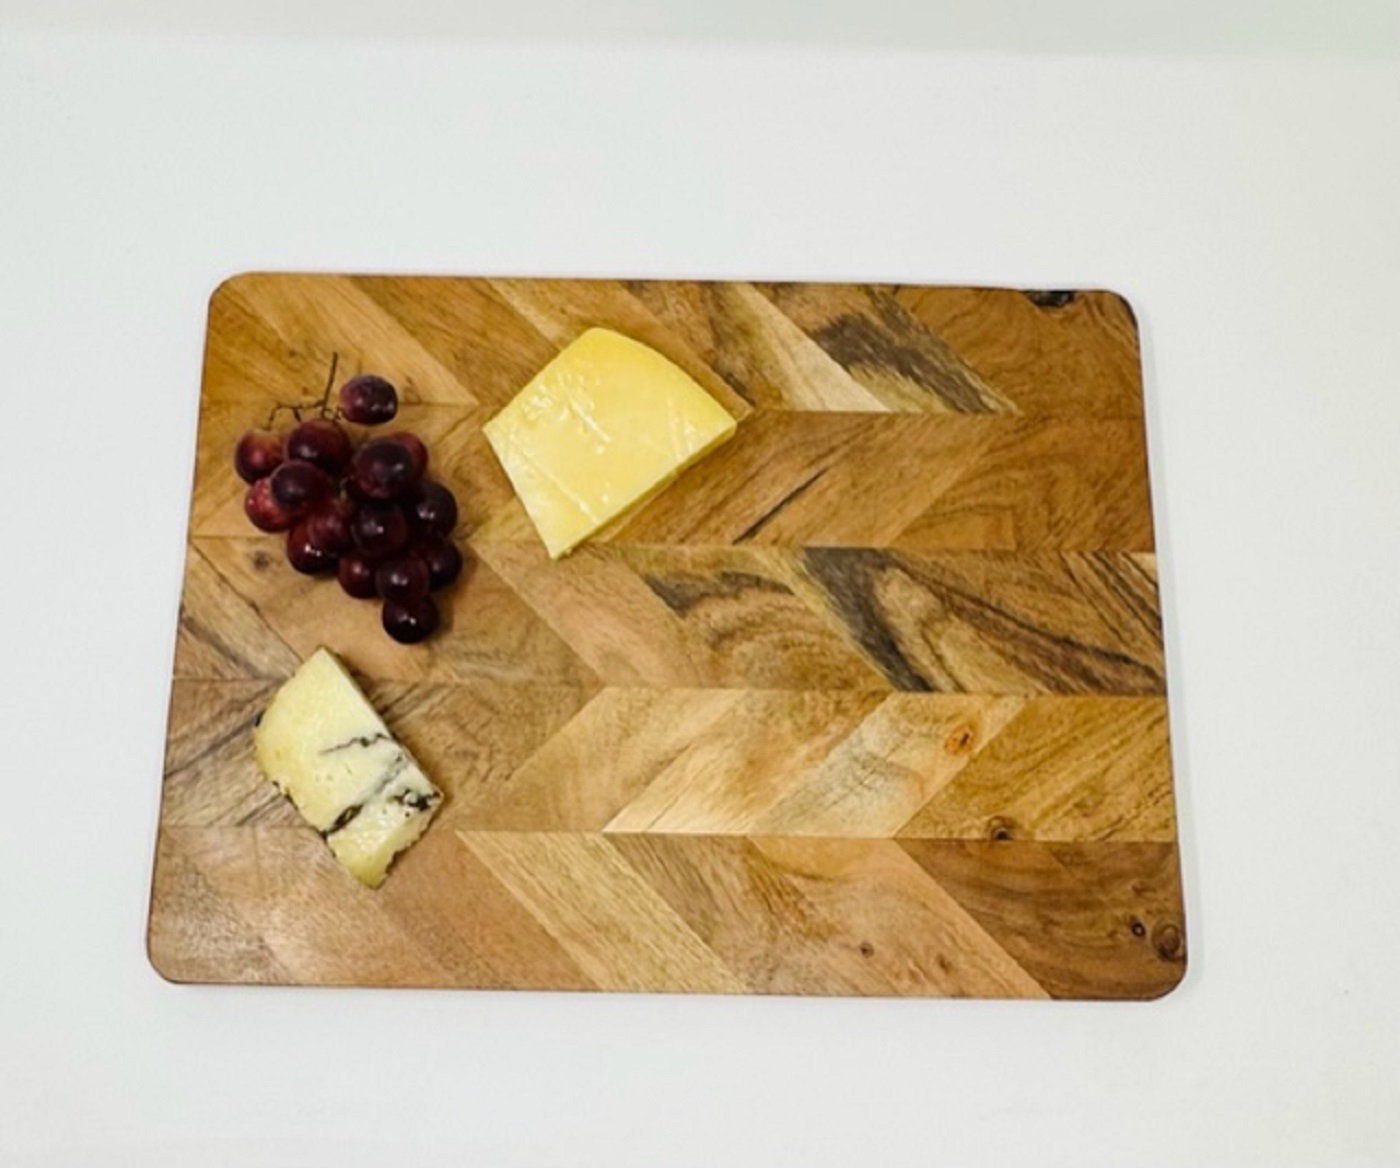 Sachar 3-Piece Bamboo Cutting Board Set - Eco-Friendly Chopping, Charcuterie, and Serving Boards Ebern Designs